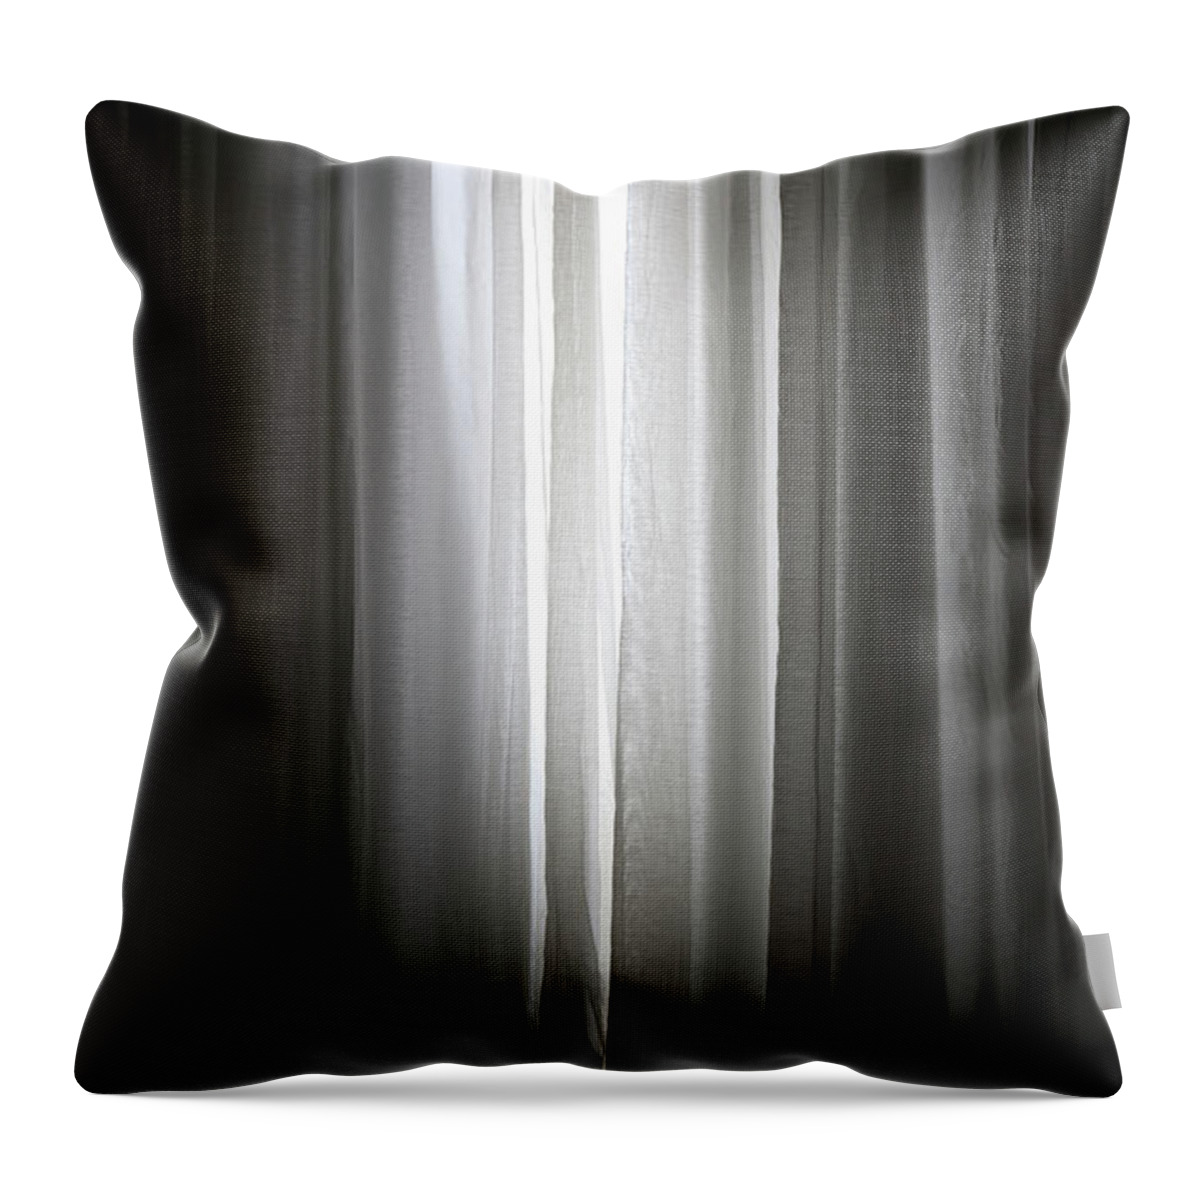 Tranquility Throw Pillow featuring the photograph Sunlight Coming In Through Slightly by Frederick Bass